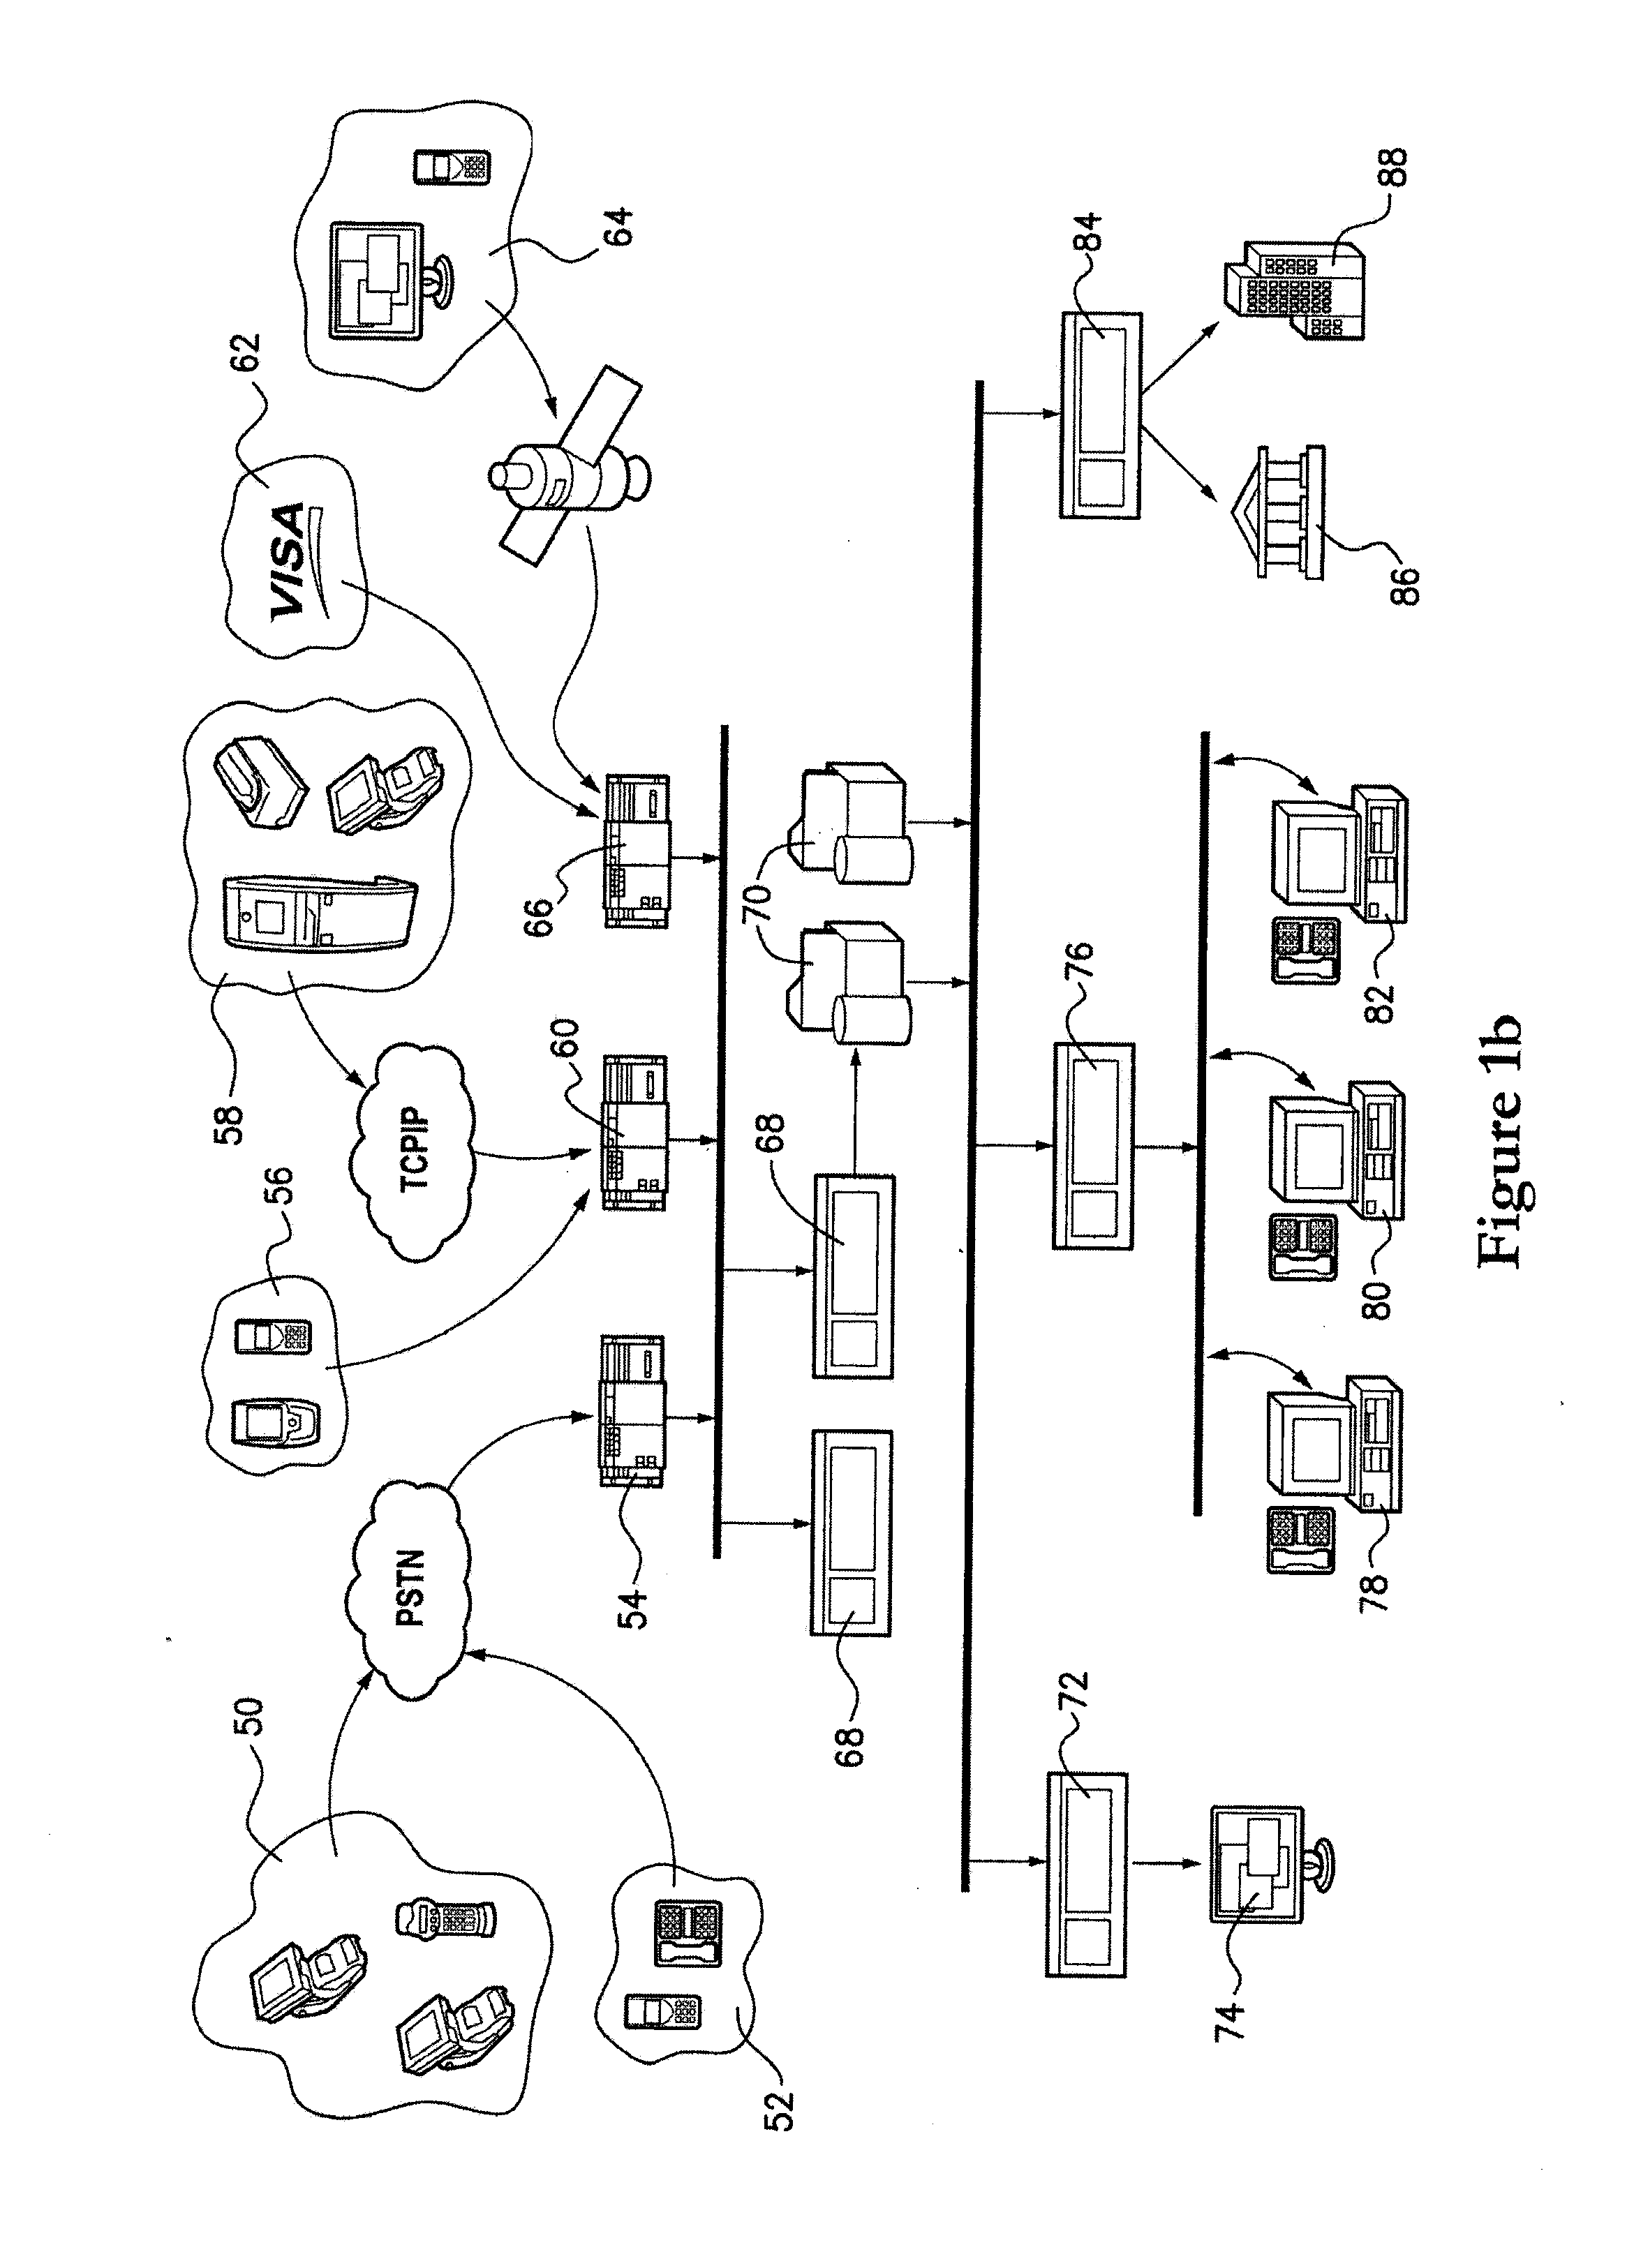 System and Method for Organising and Operating an Electronic Account